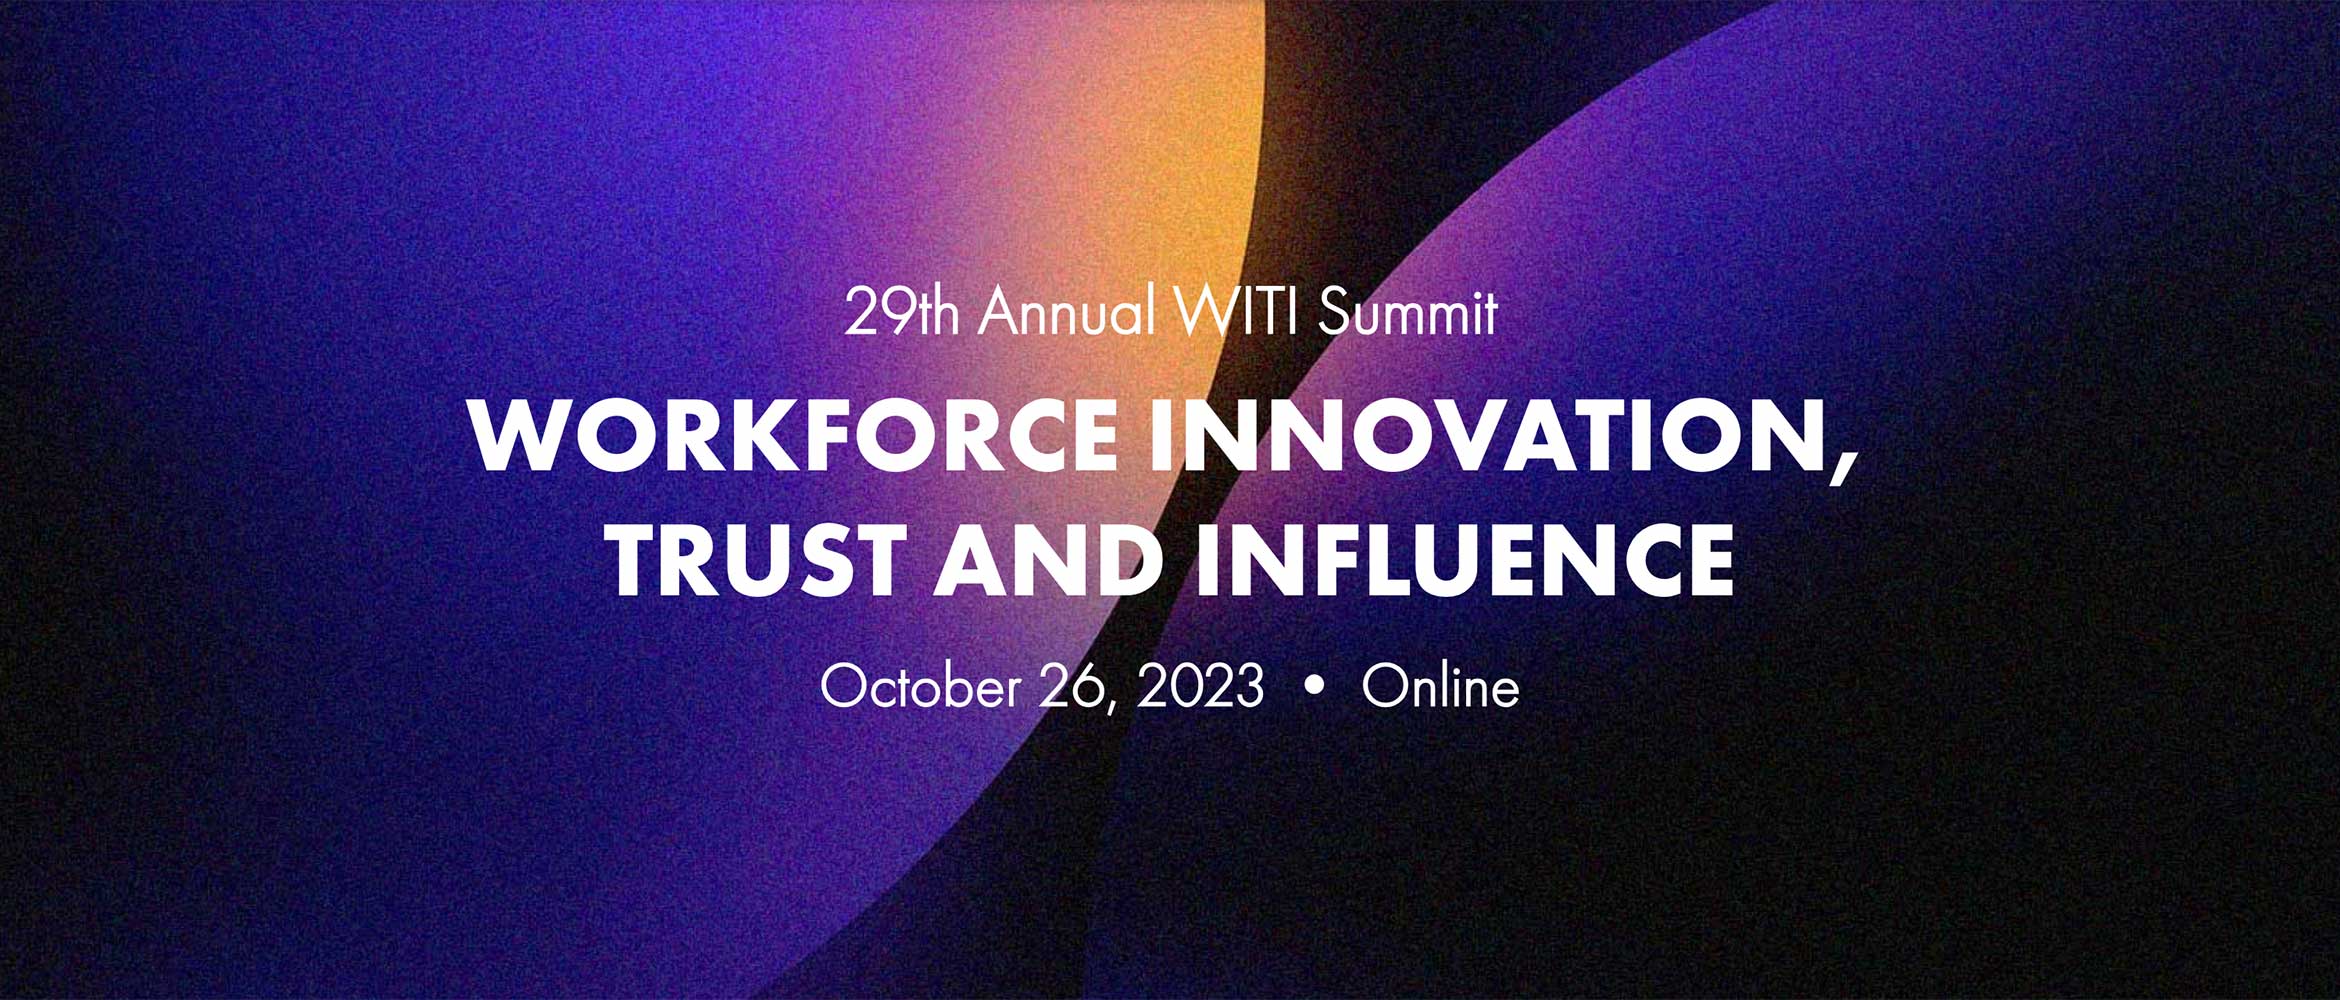 Join us for the 29th Annual WITI Summit: Workforce Innovation, Trust and Influence - October 26, 2023